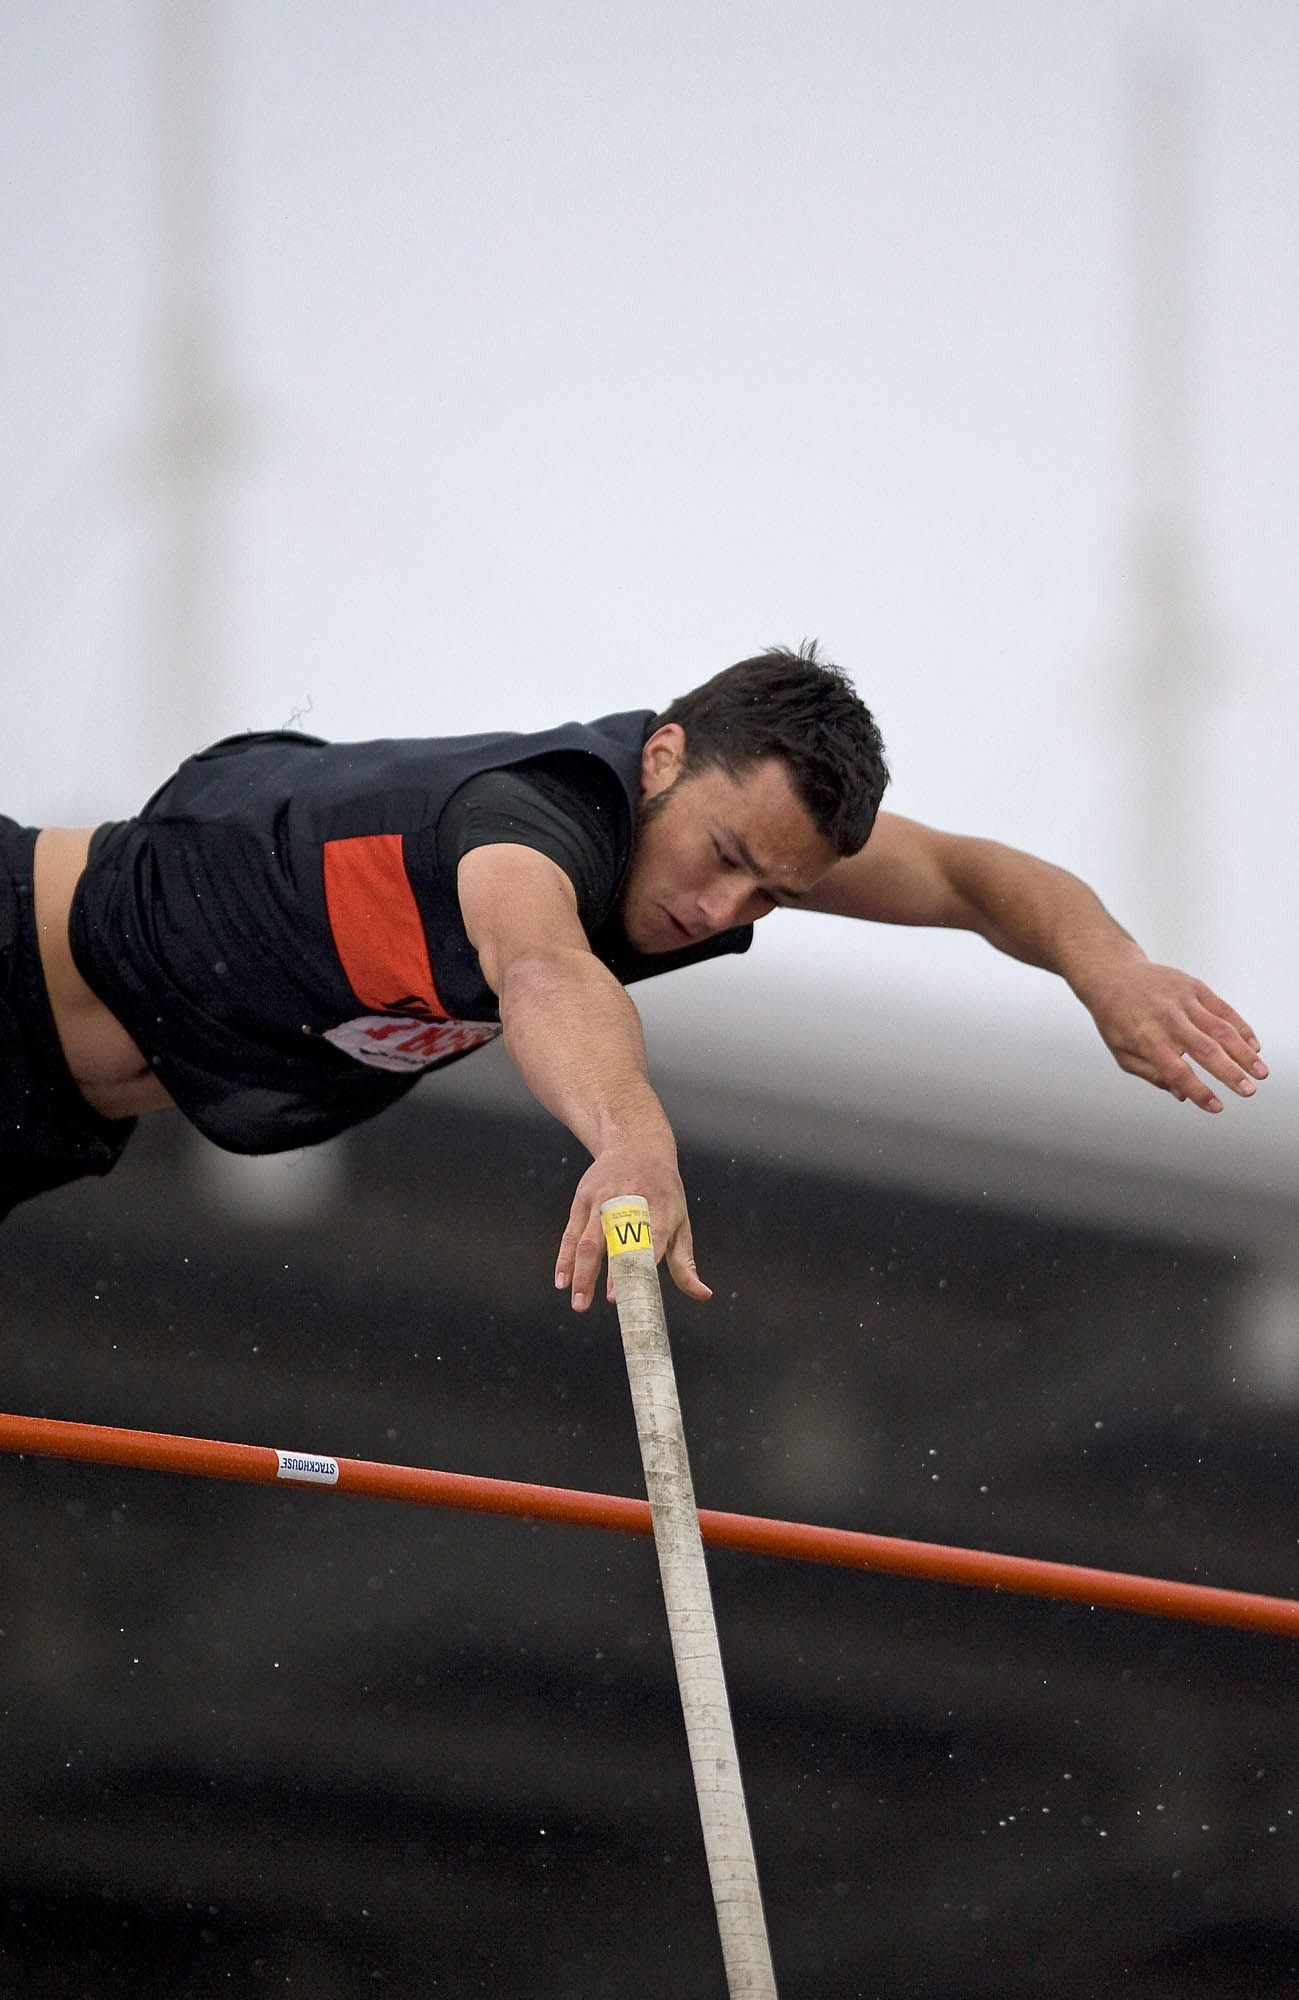 Washougal's Brendan Casey won the pole vault on Friday, clearing 14 feet, 6 inches.